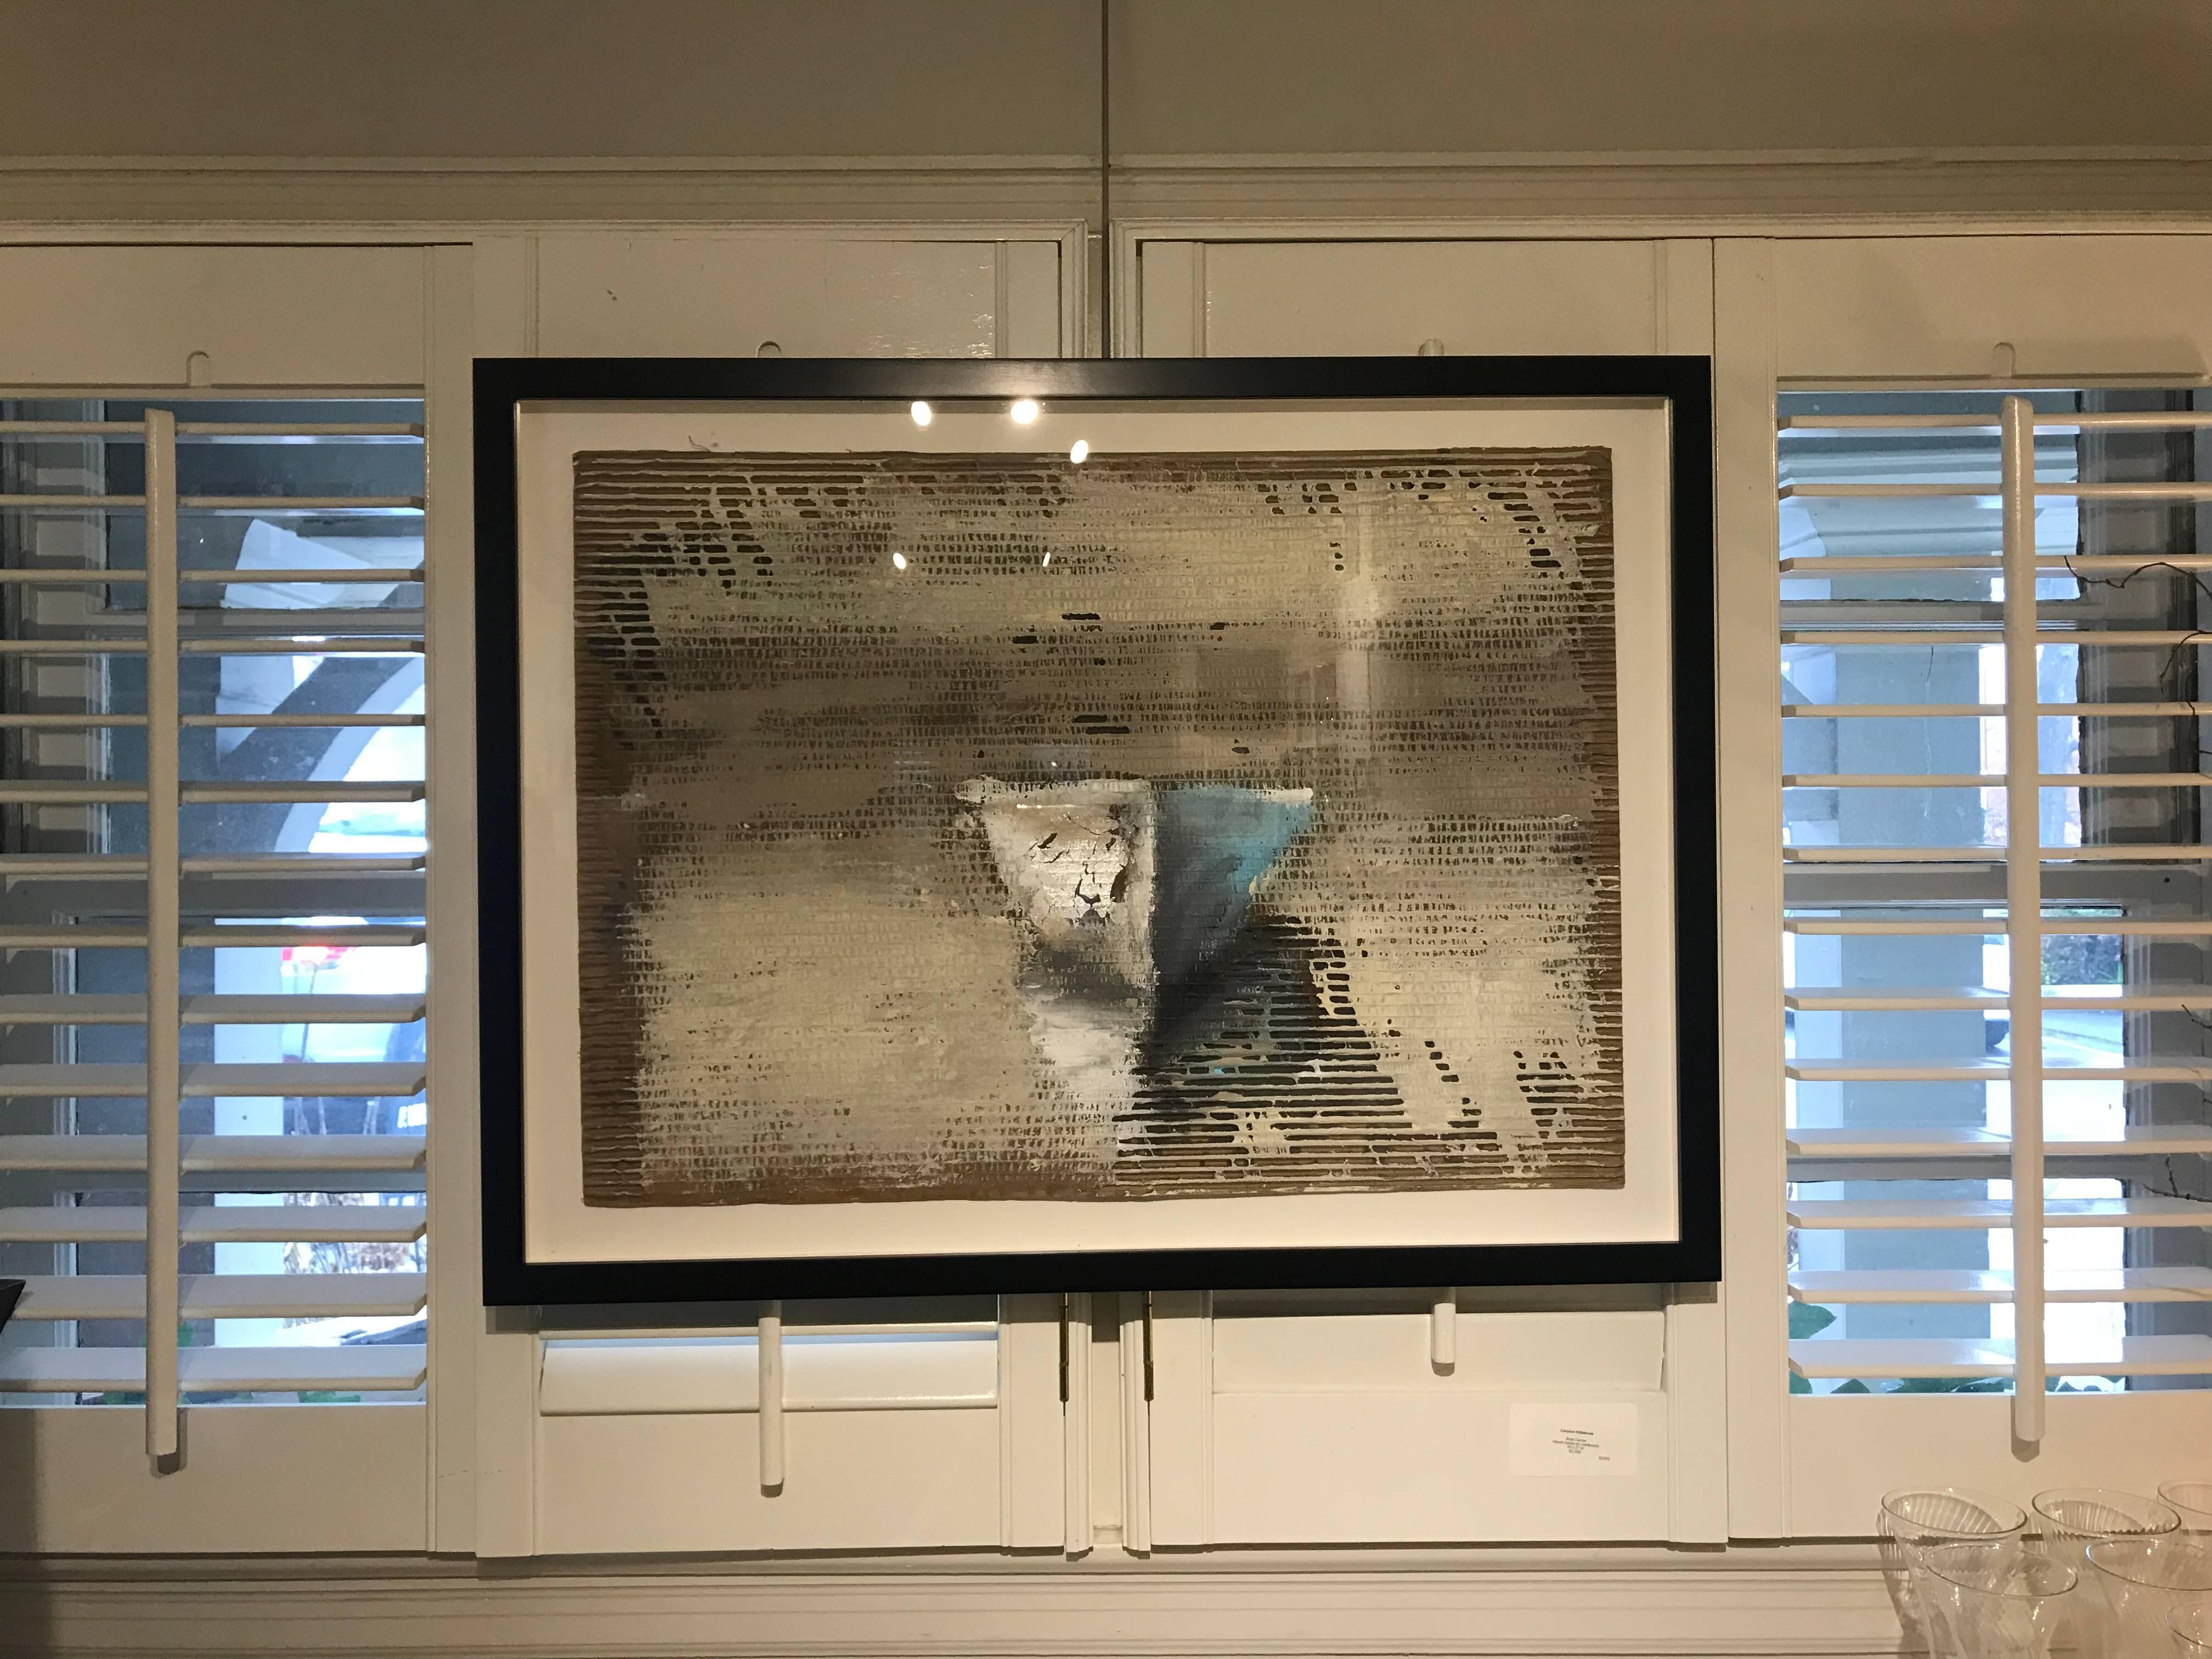 'Sweet Love', Medium Framed Mixed Media on Cardboard Contemporary Painting - Gray Landscape Painting by Carylon Killebrew